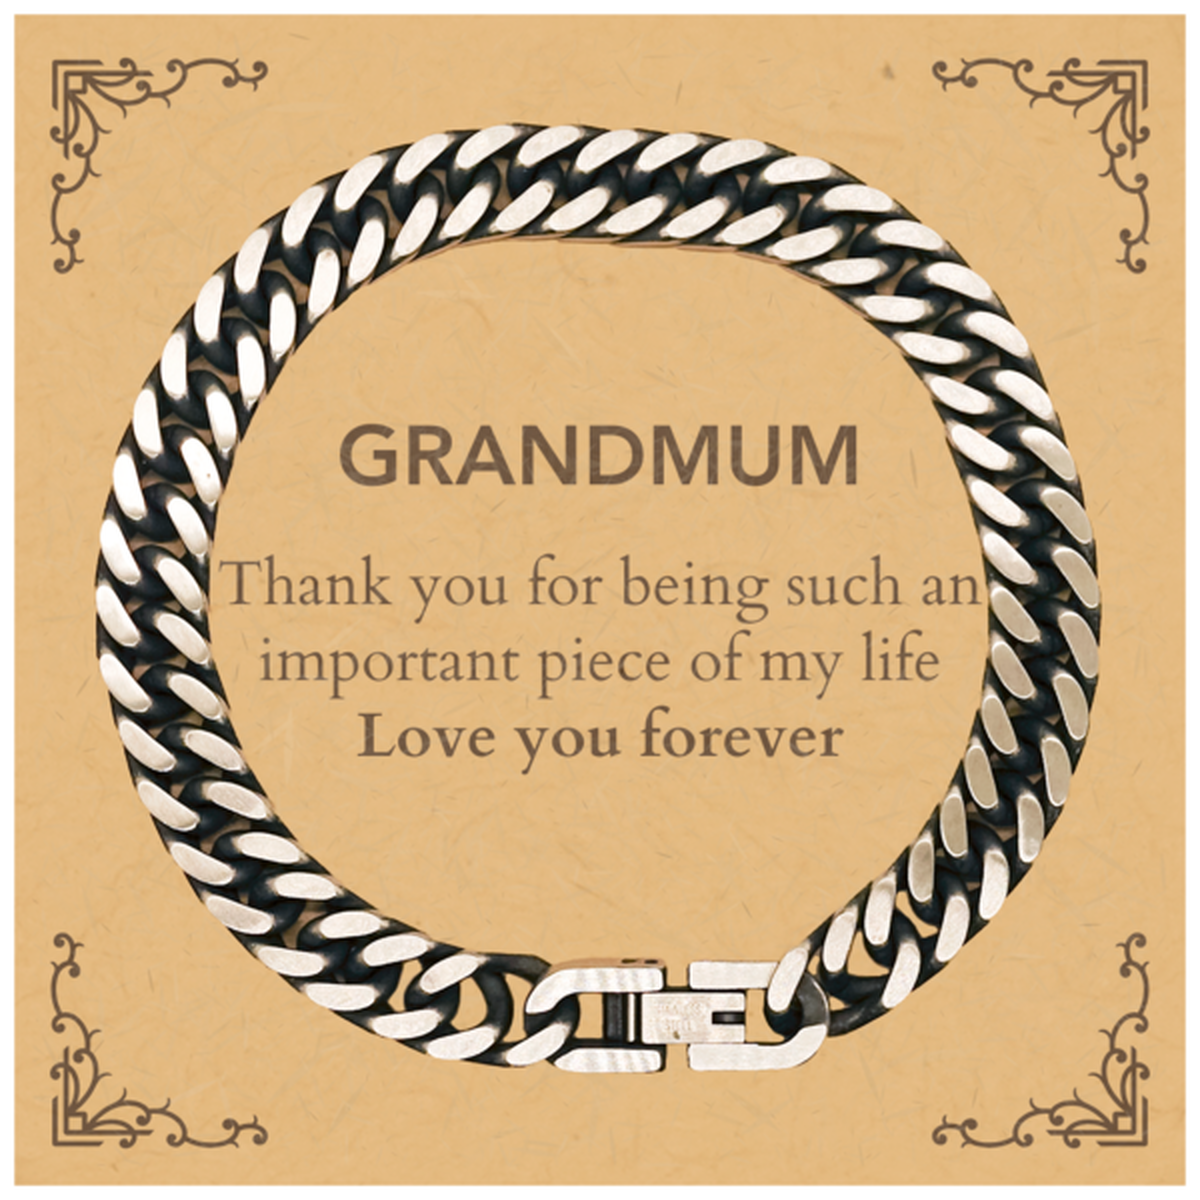 Appropriate Grandmum Cuban Link Chain Bracelet Epic Birthday Gifts for Grandmum Thank you for being such an important piece of my life Grandmum Christmas Mothers Fathers Day